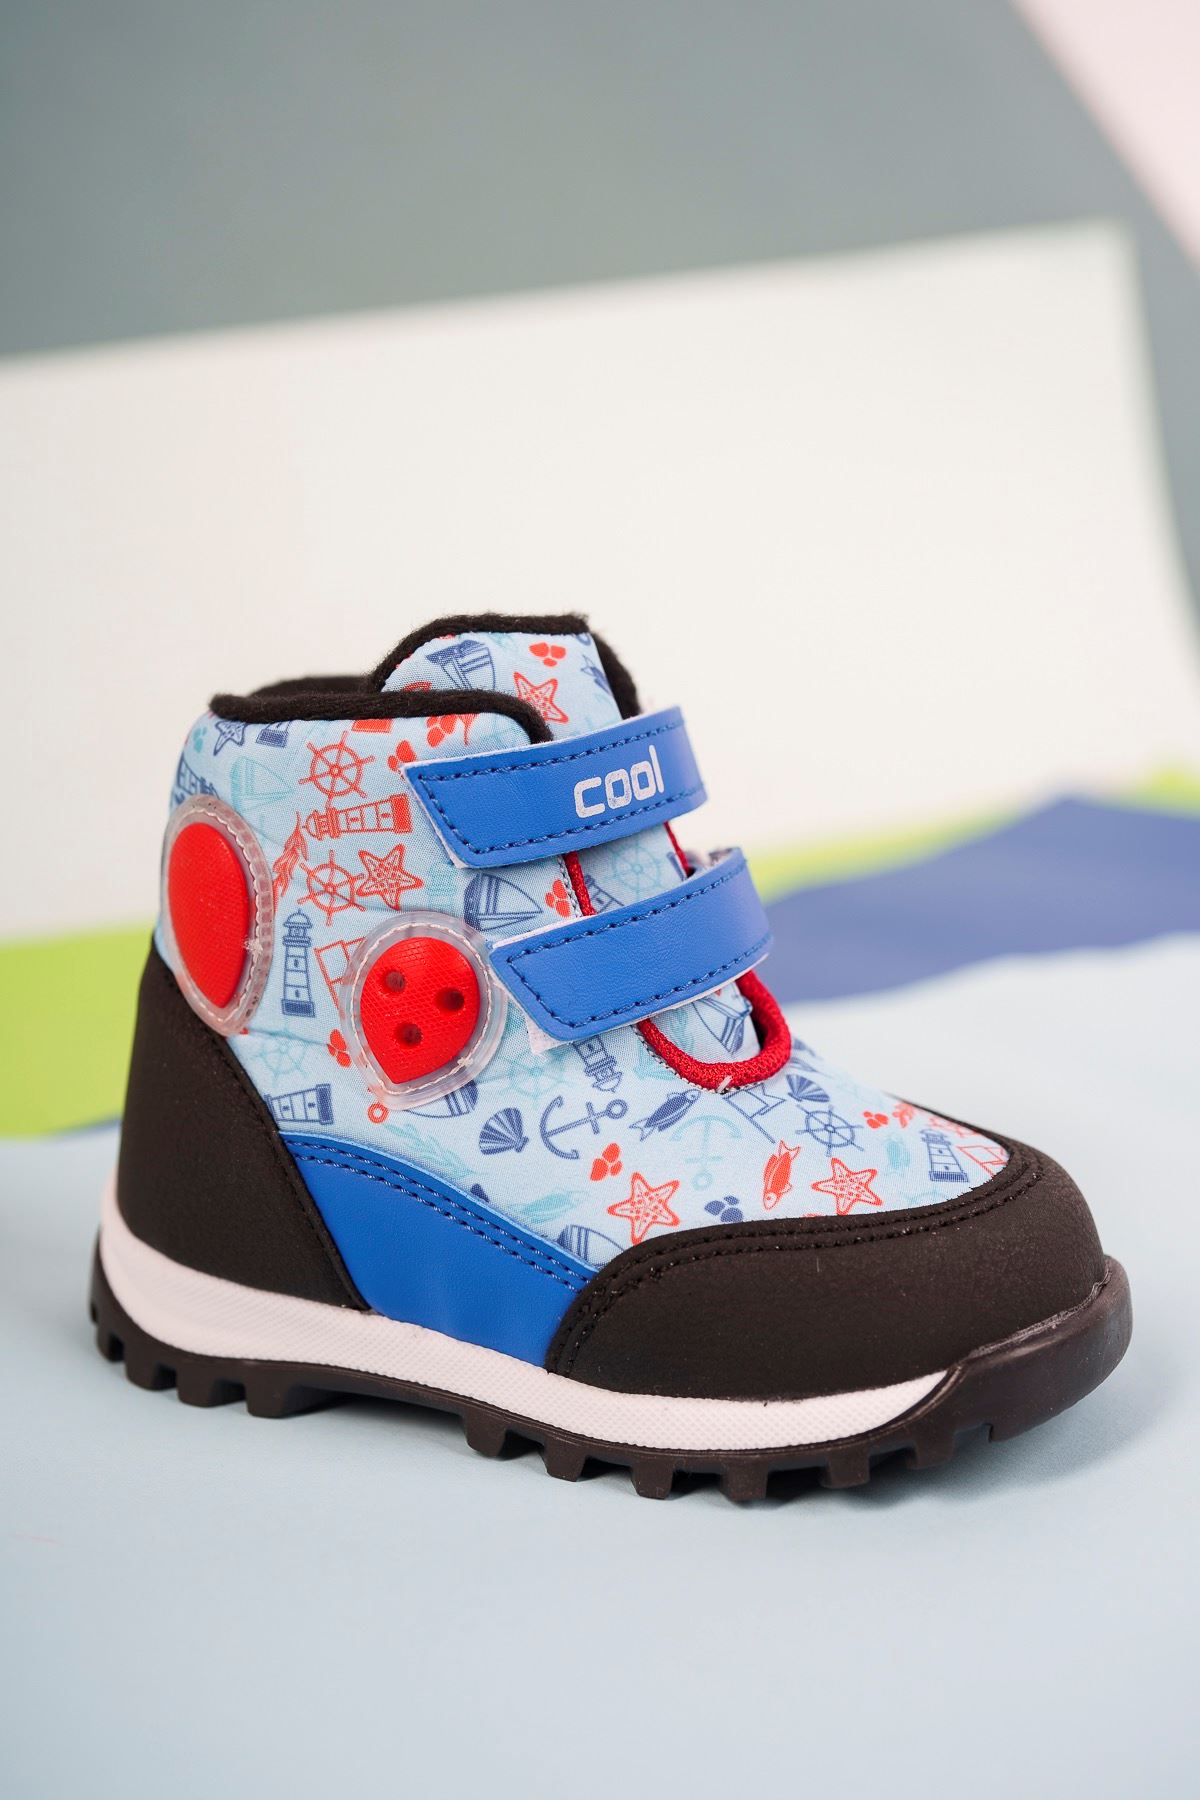 Printed Blue Baby Boots